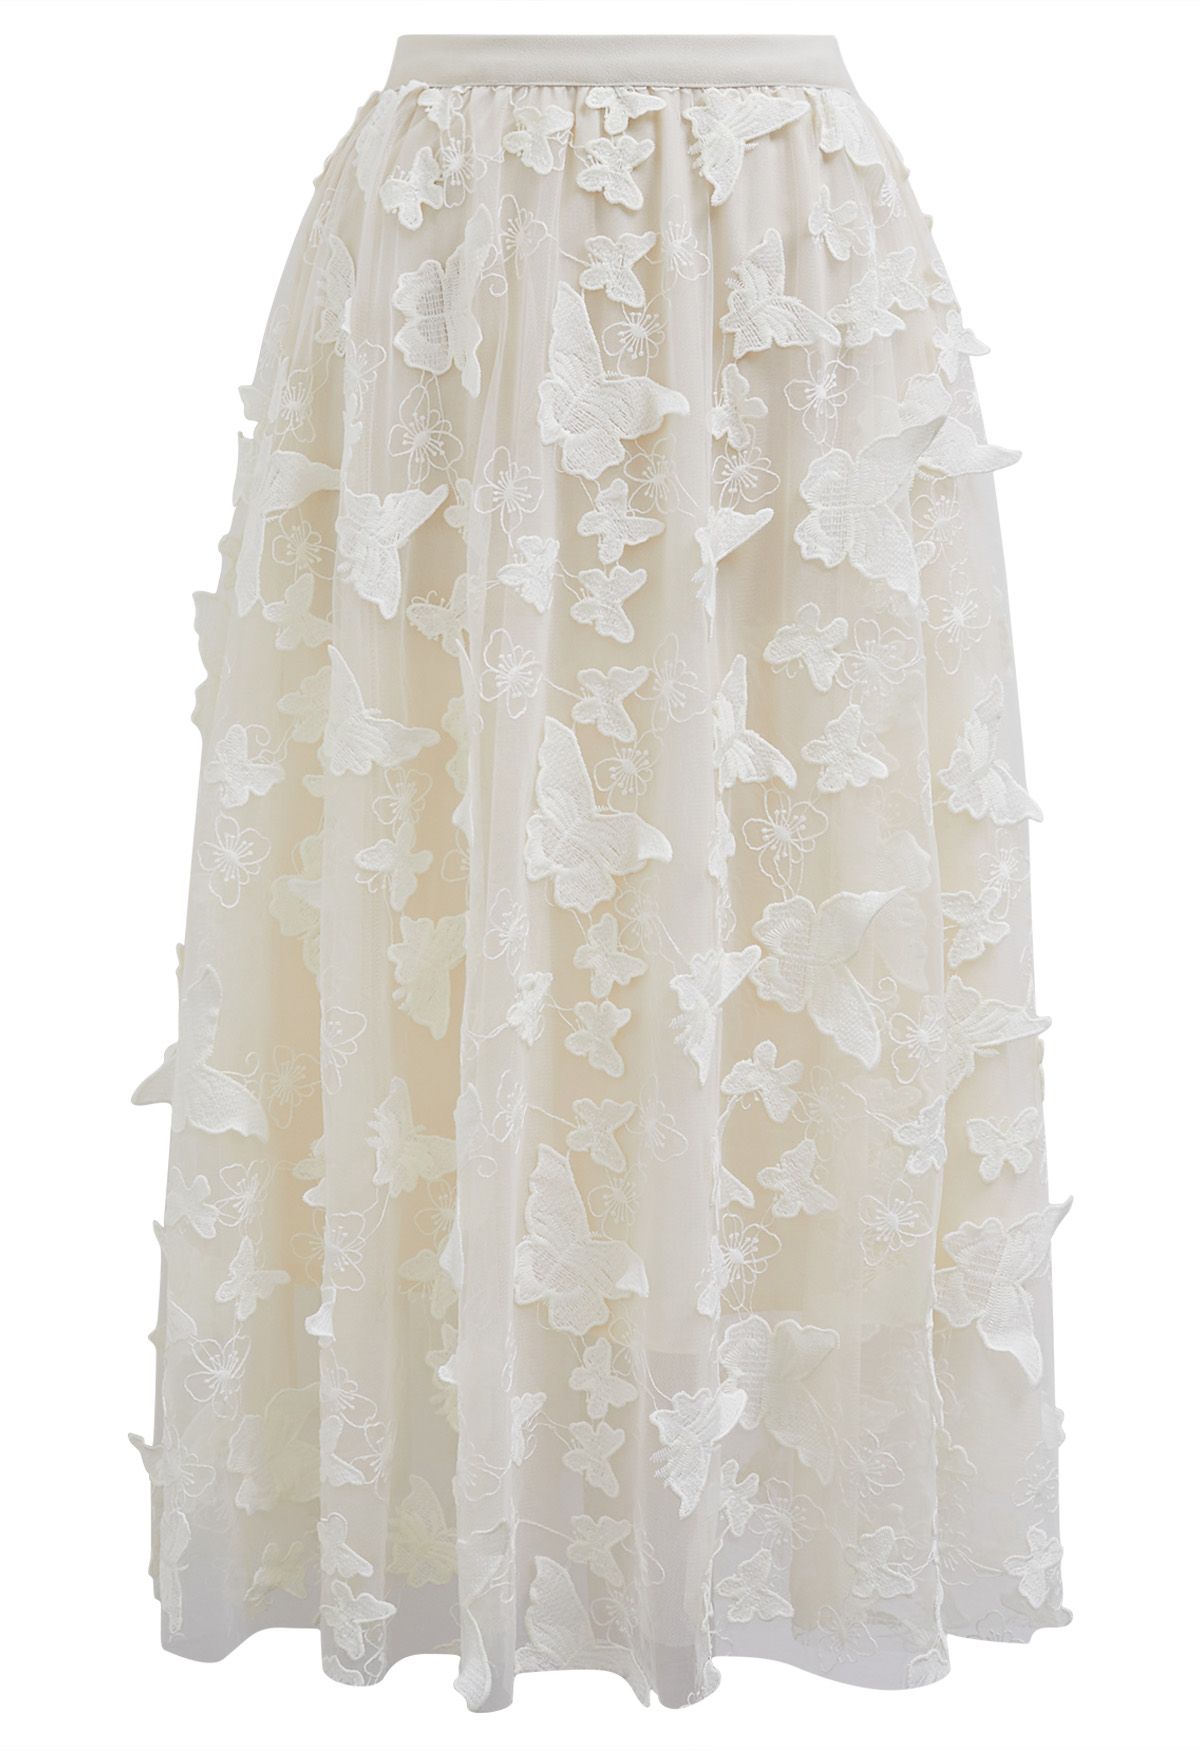 Loveliness 3D Butterfly Embroidered Mesh Tulle Midi Skirt in Cream